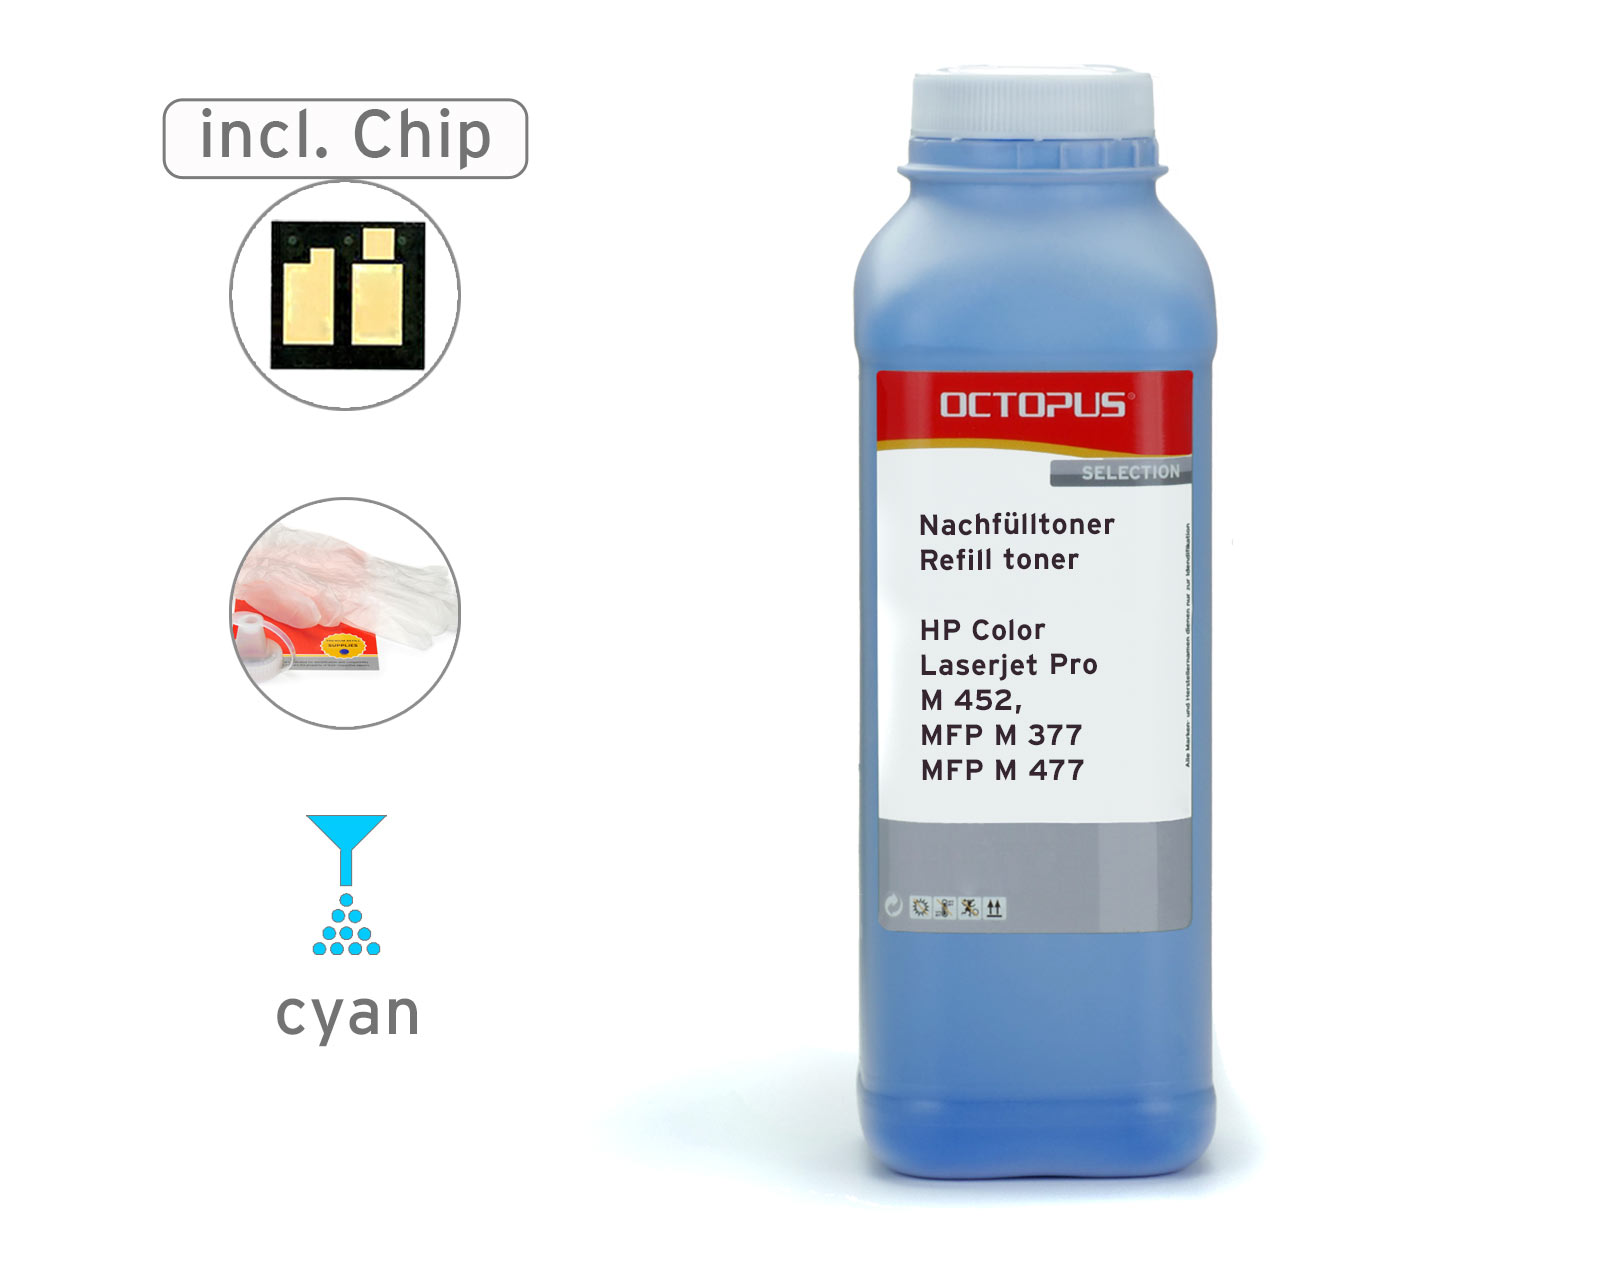 Refill toner set with chip for HP Color Laserjet Pro M 452, MFP M 377 and MFP M 477, cyan